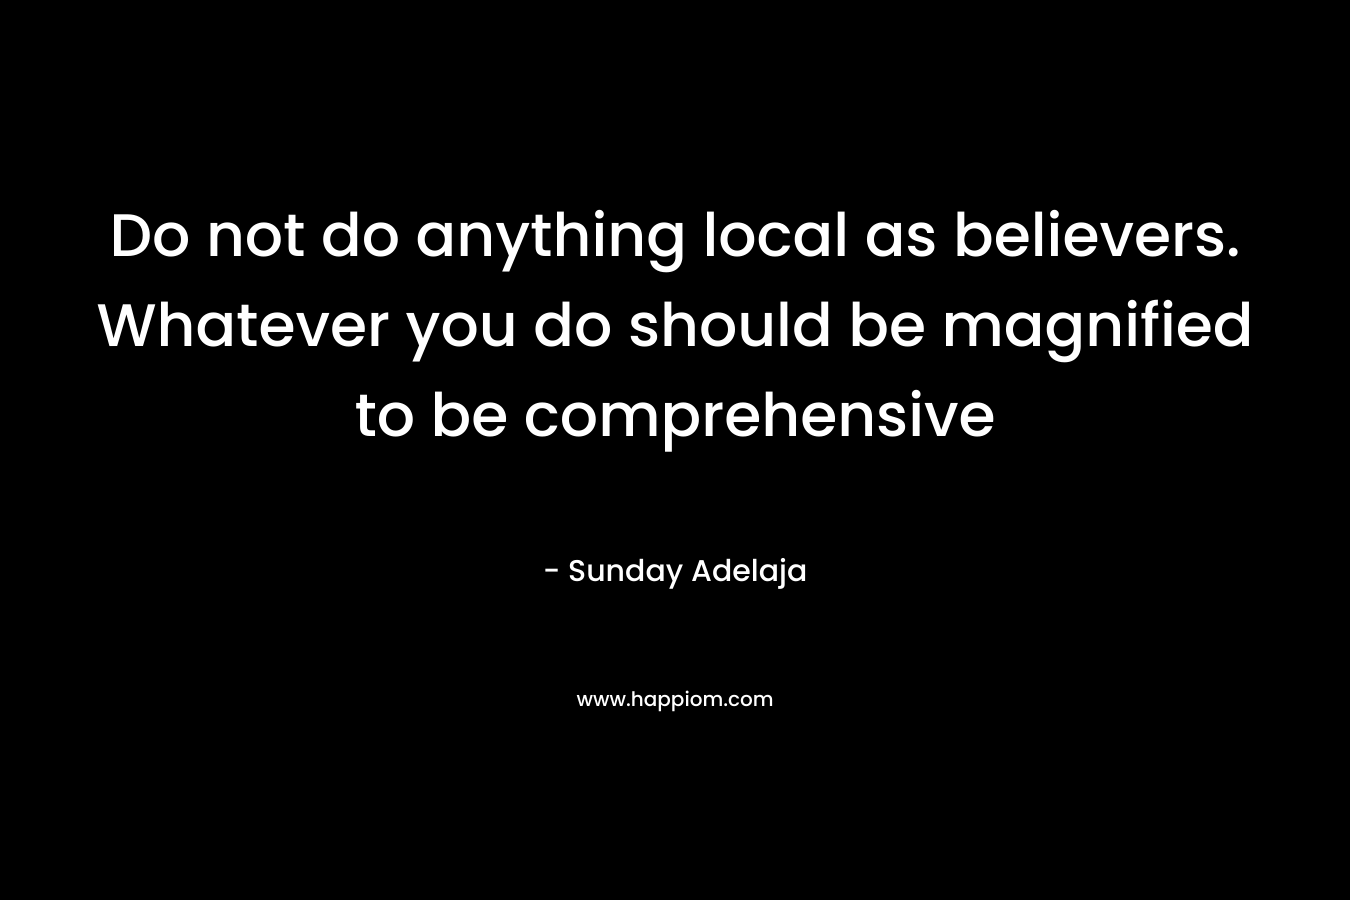 Do not do anything local as believers. Whatever you do should be magnified to be comprehensive